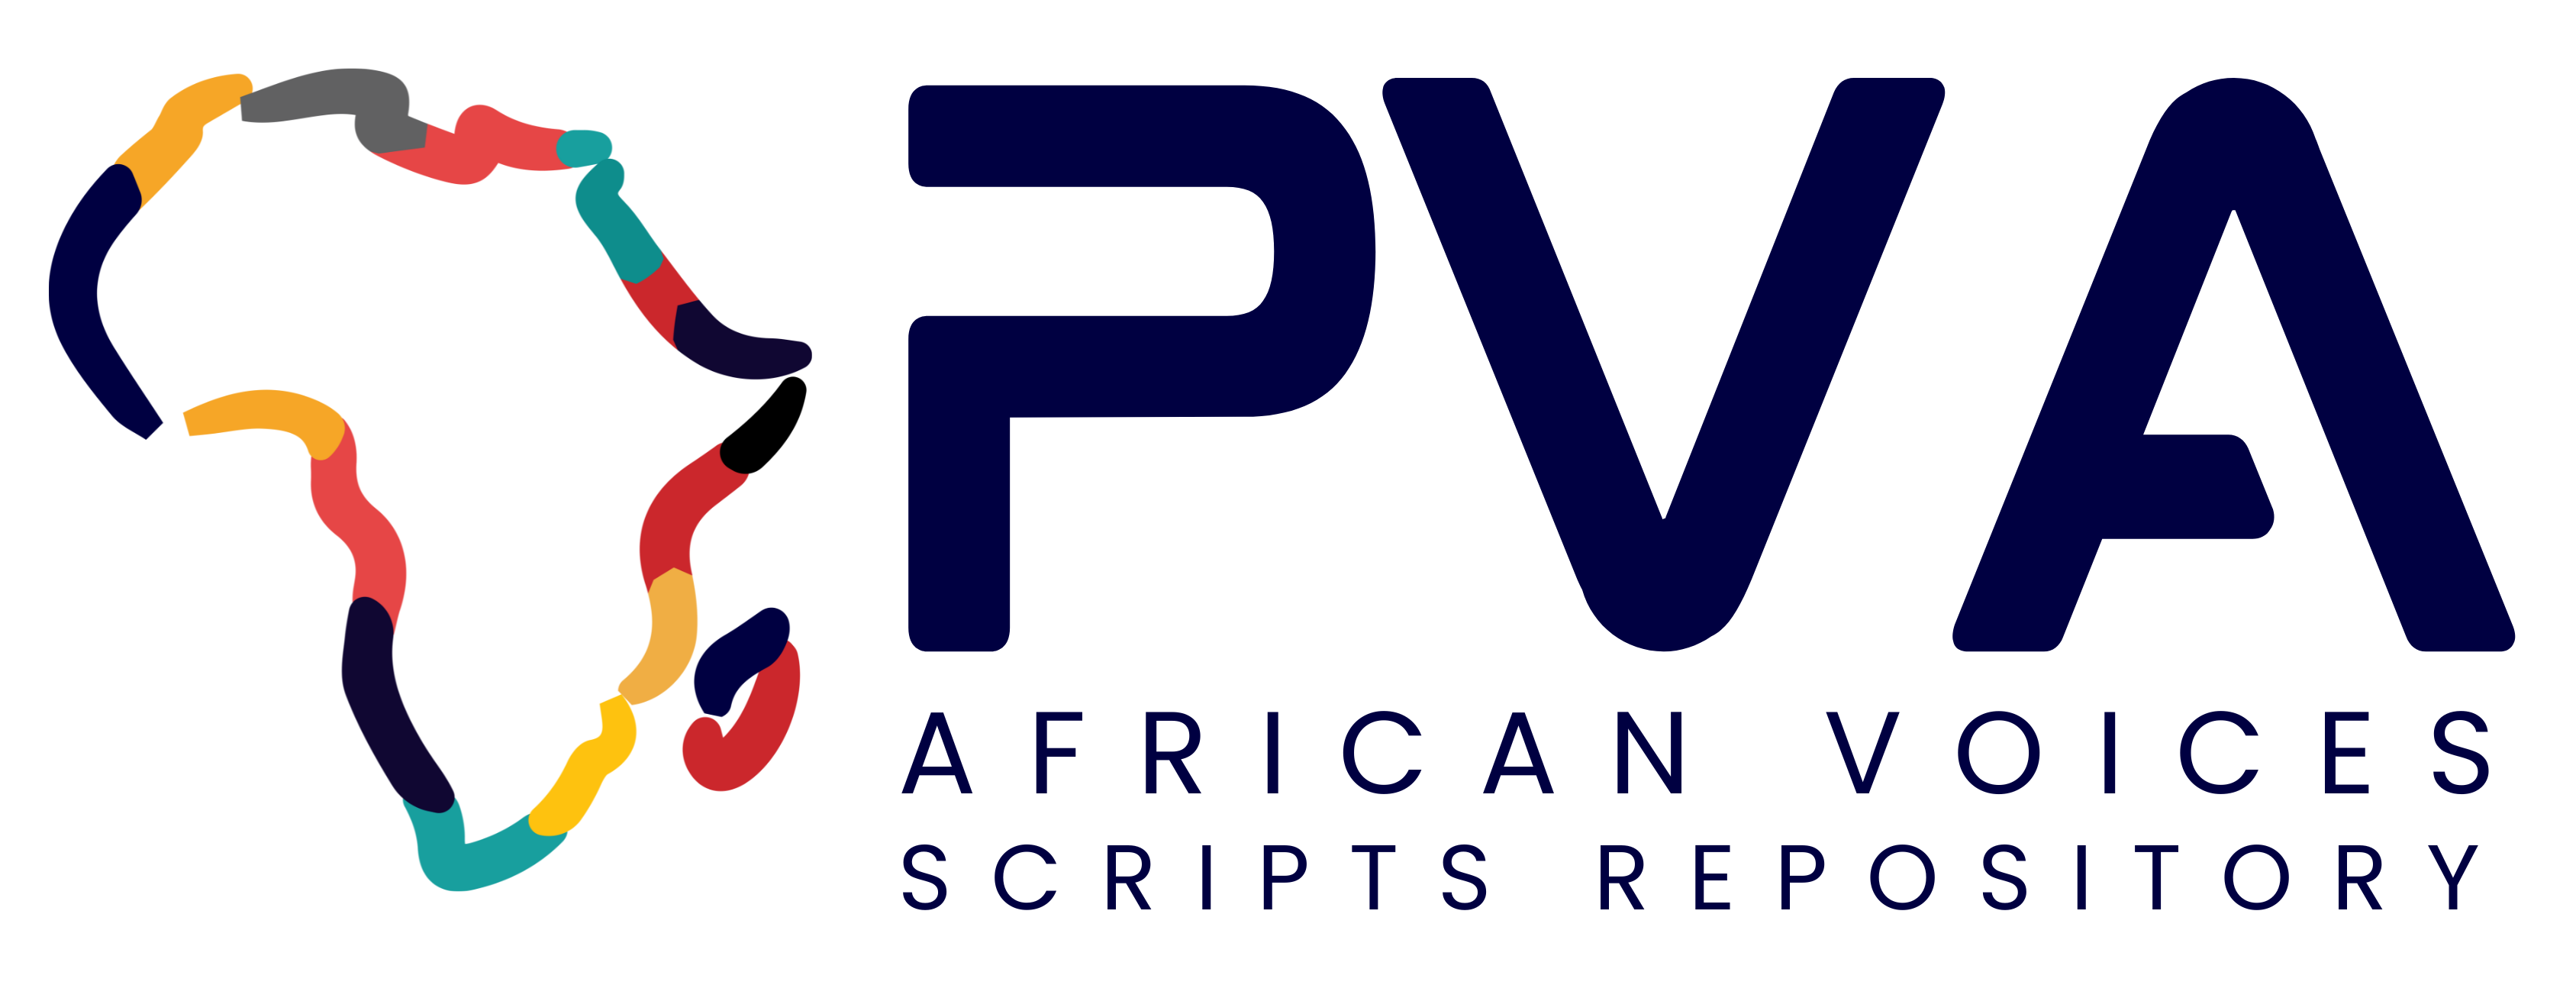 African Voices Script Repository